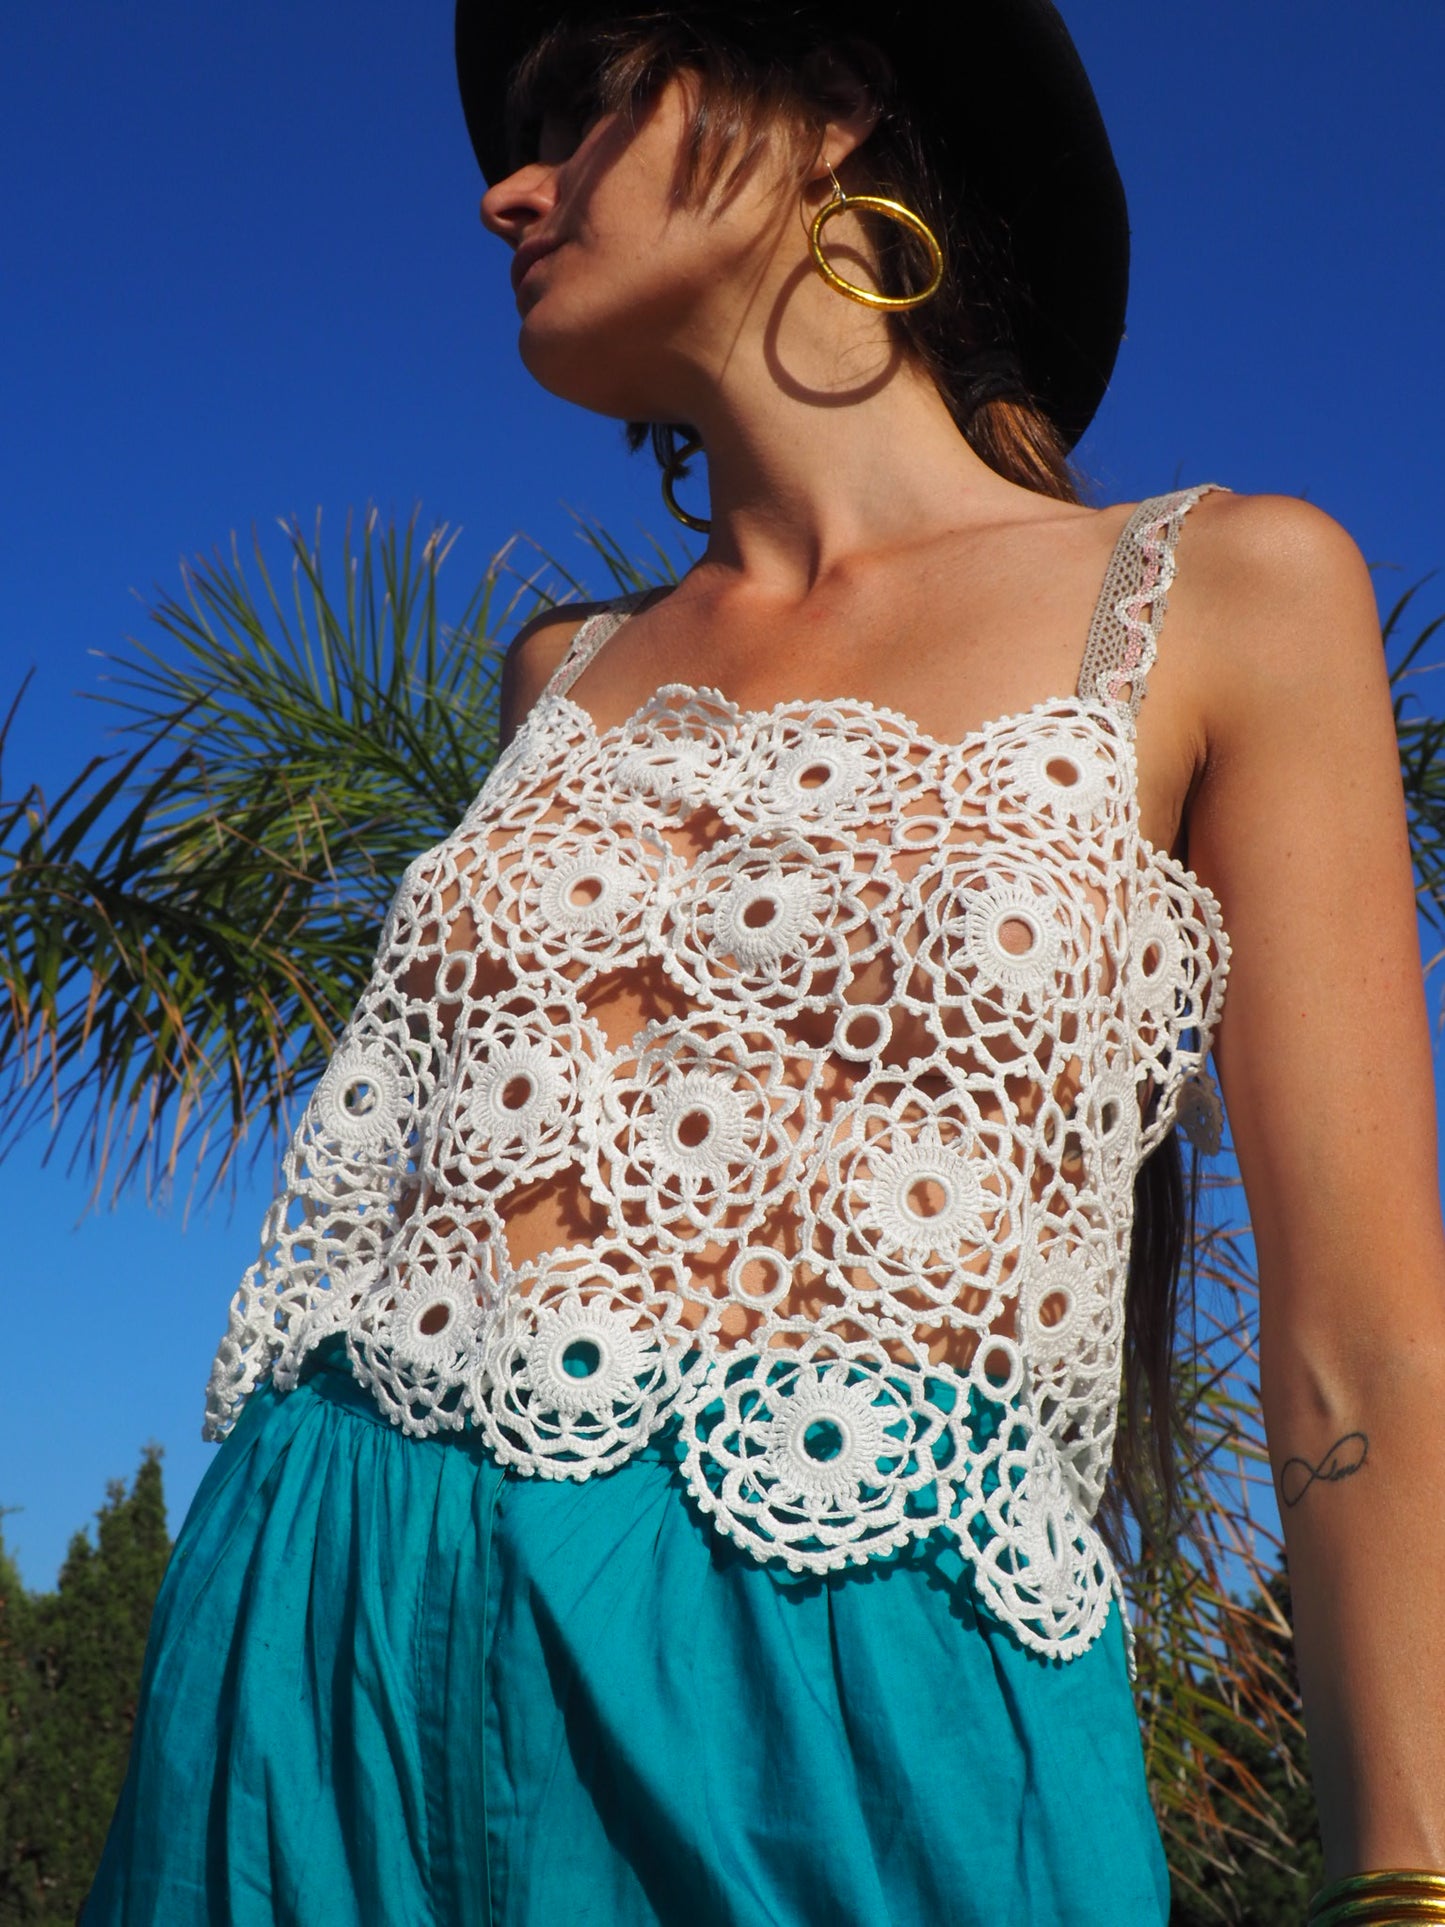 Antique Lace crochet up-cycled top by Vagabond Ibiza